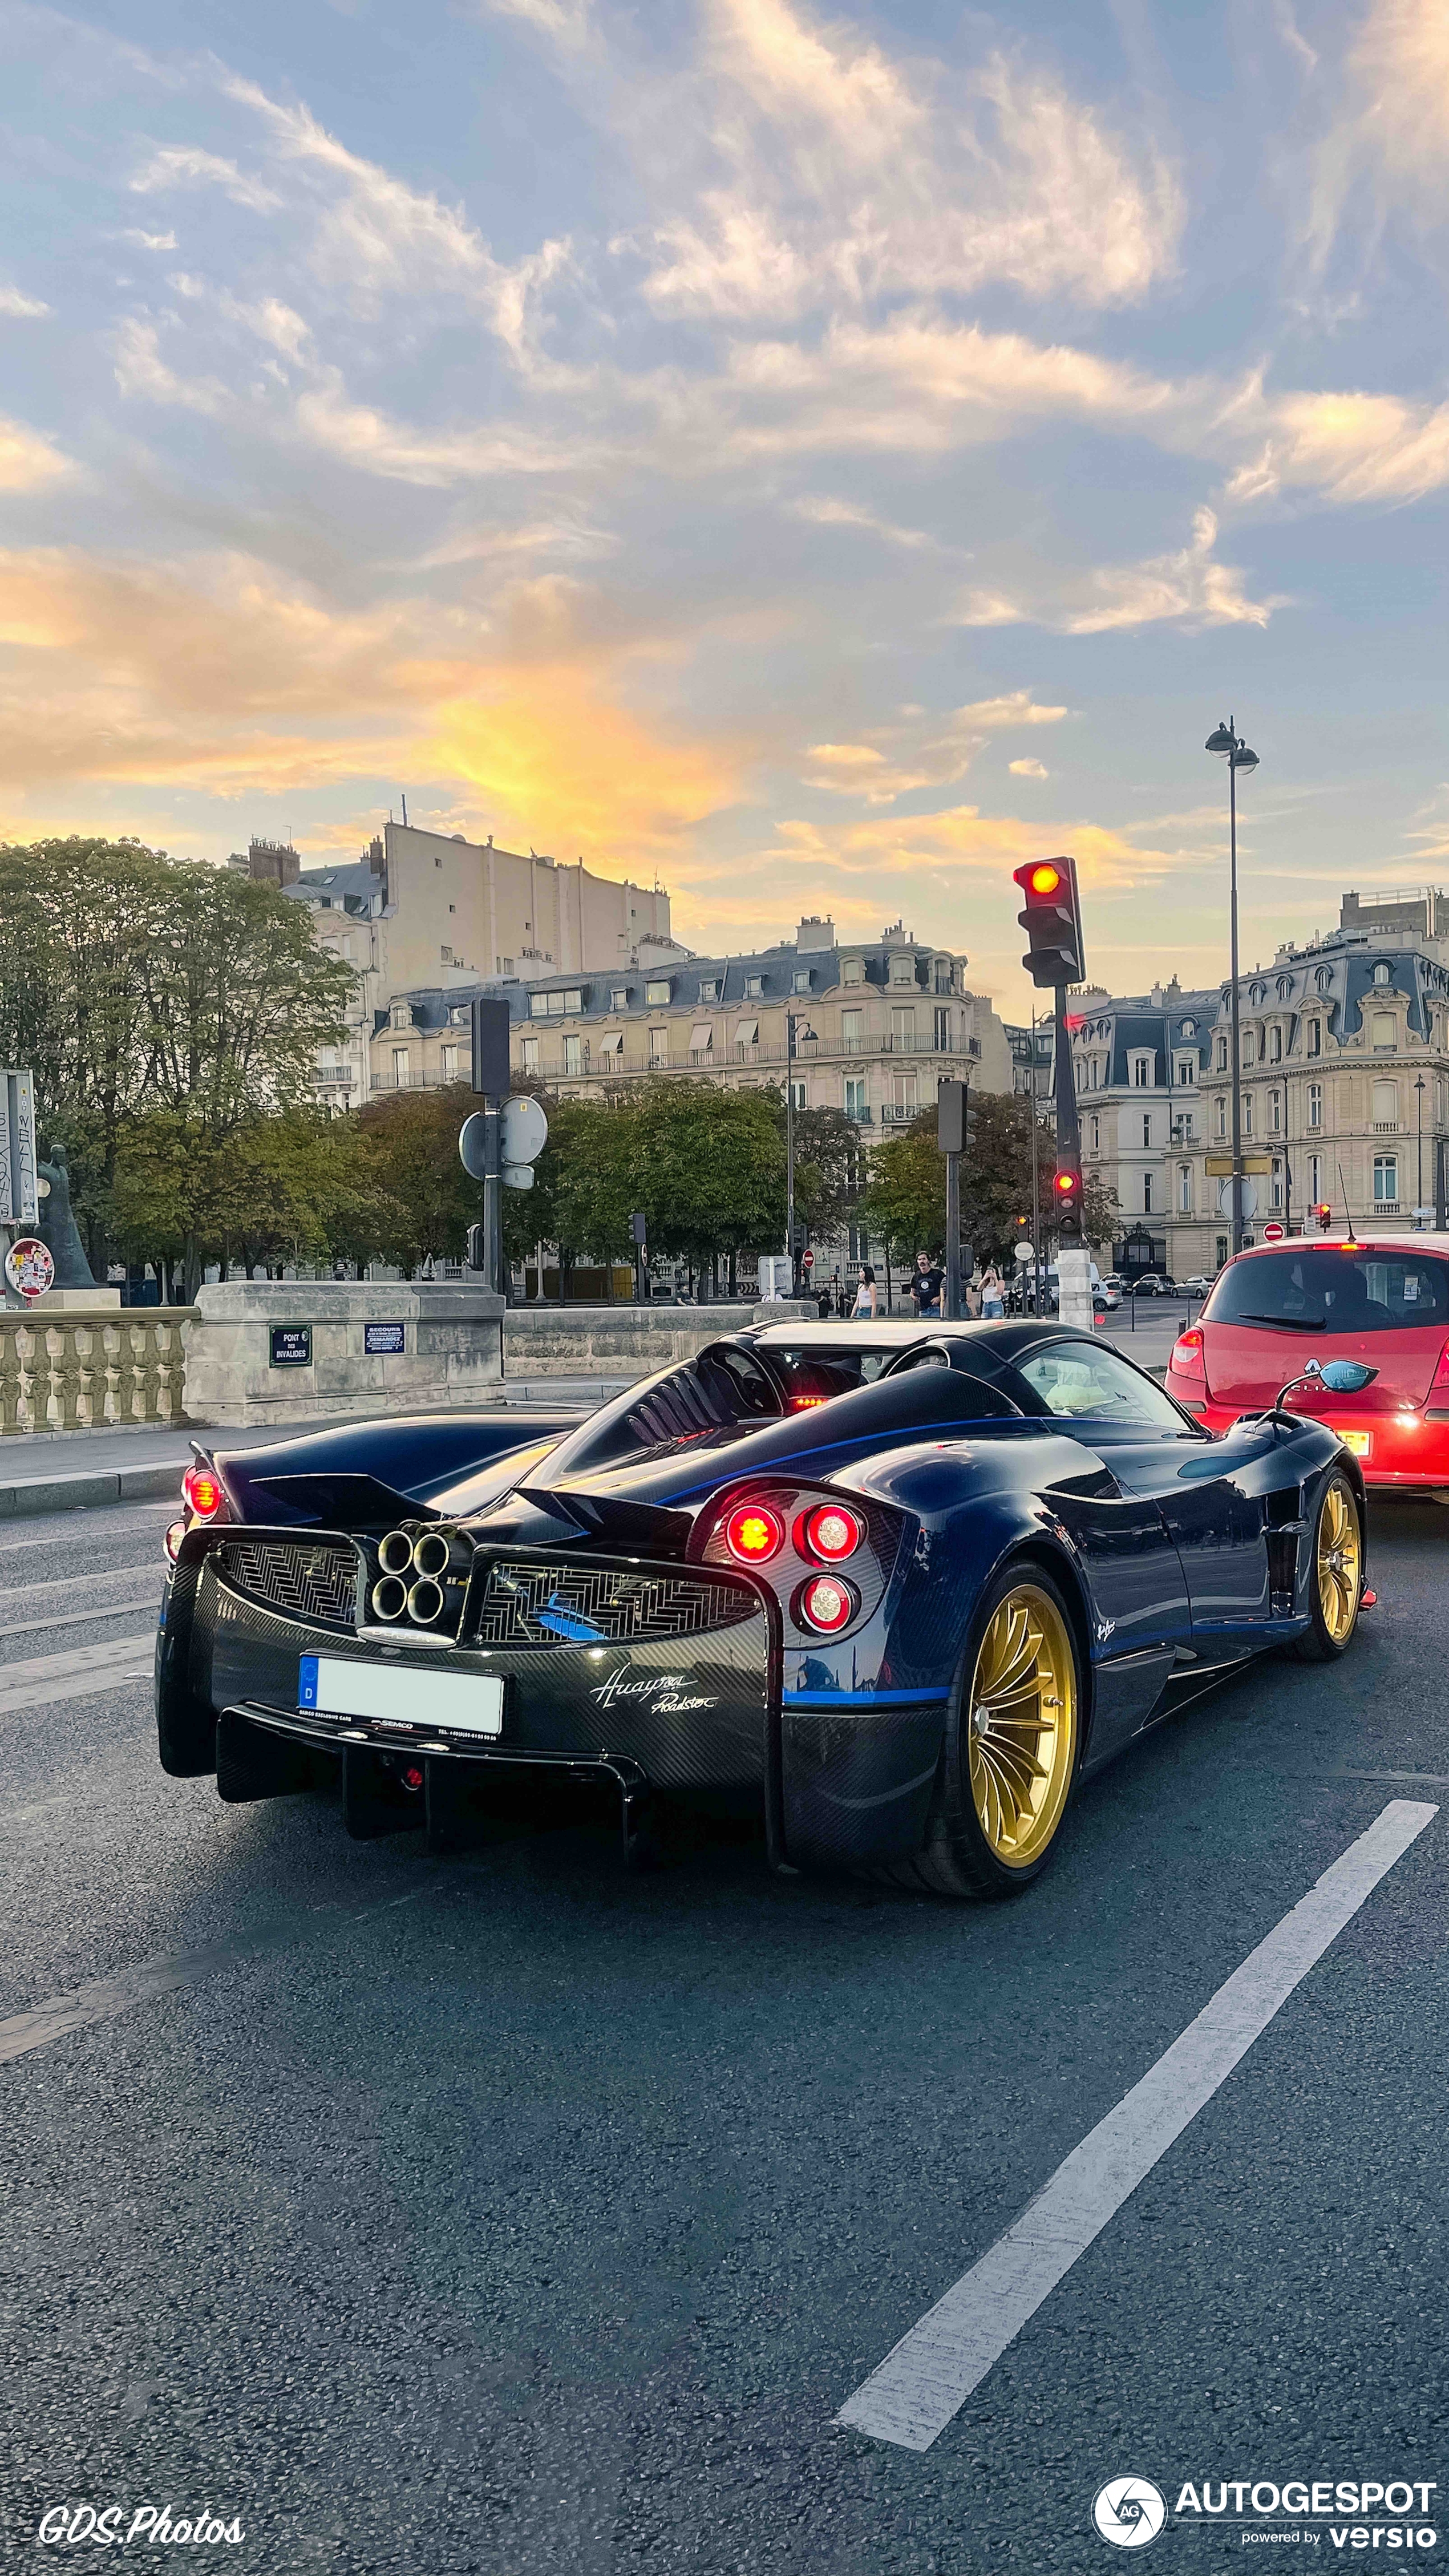 Once again, the Huayra Roadster makes an appearance in Paris